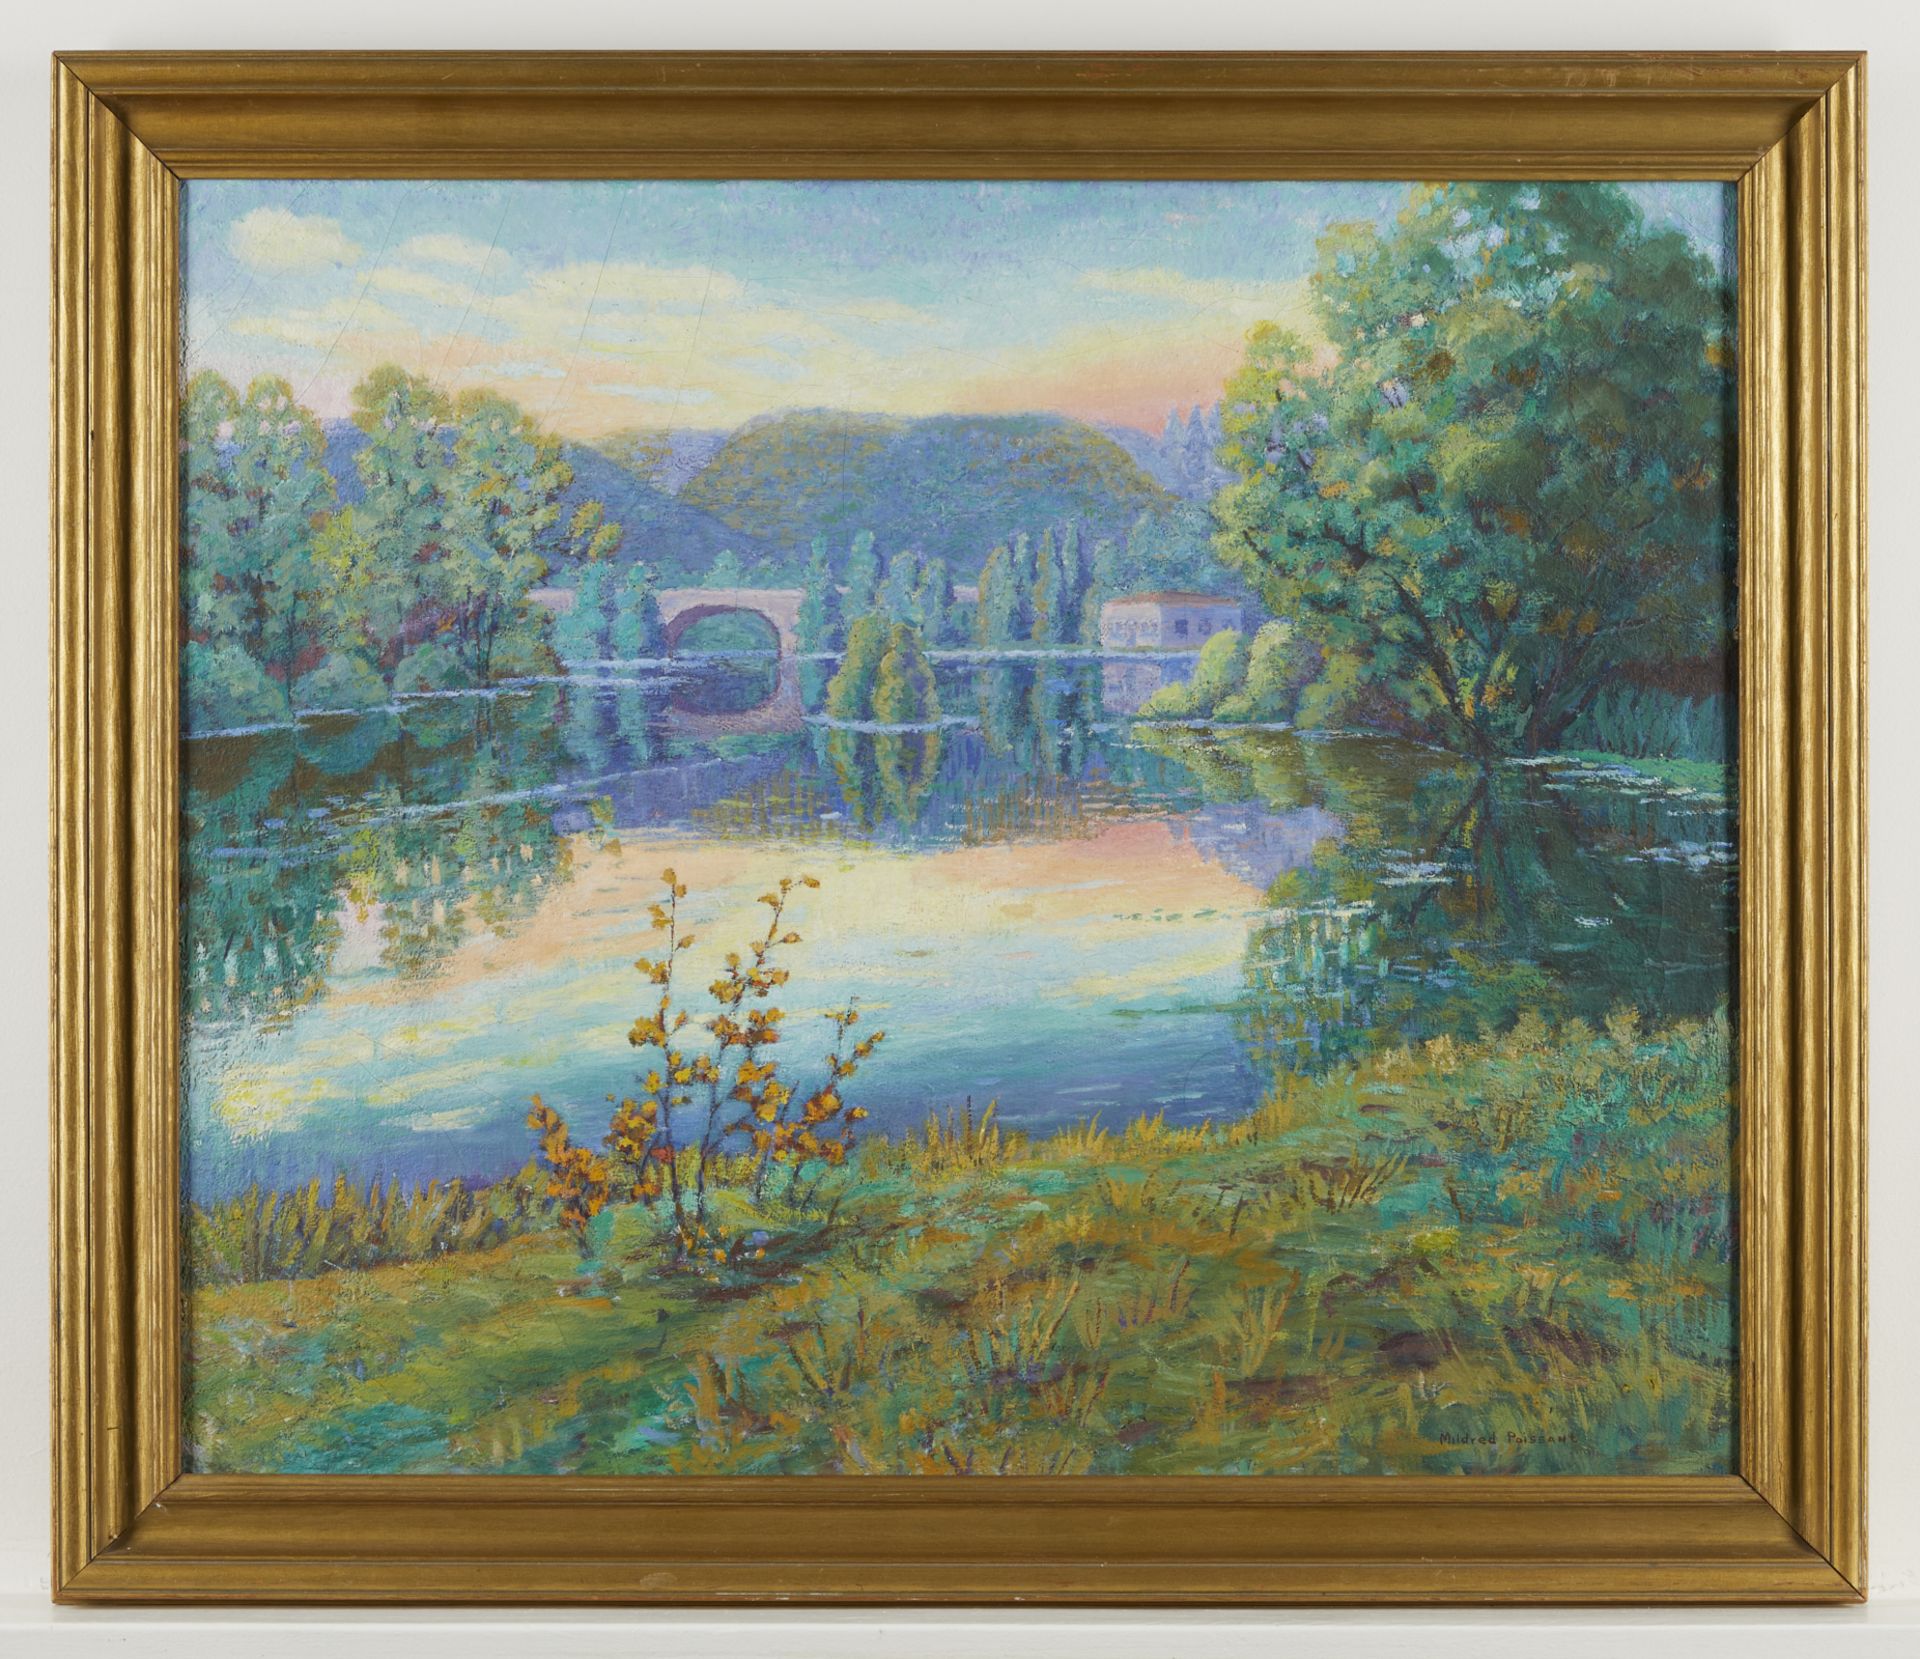 Mildred Poissant "Sundown on the River" Painting - Image 3 of 7